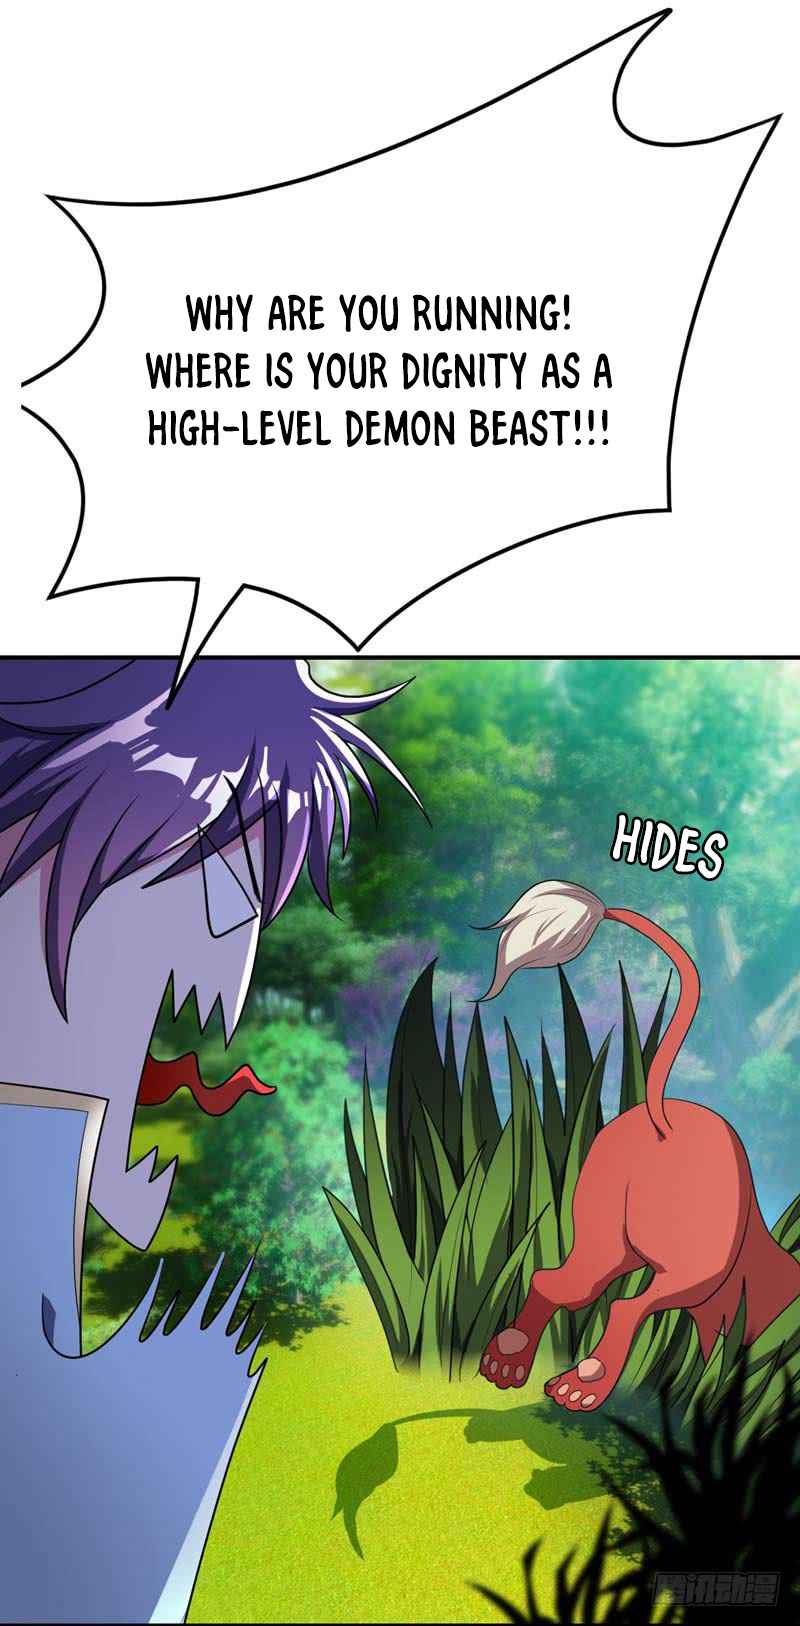 Rise of The Demon King Ch. 25 Who did this?